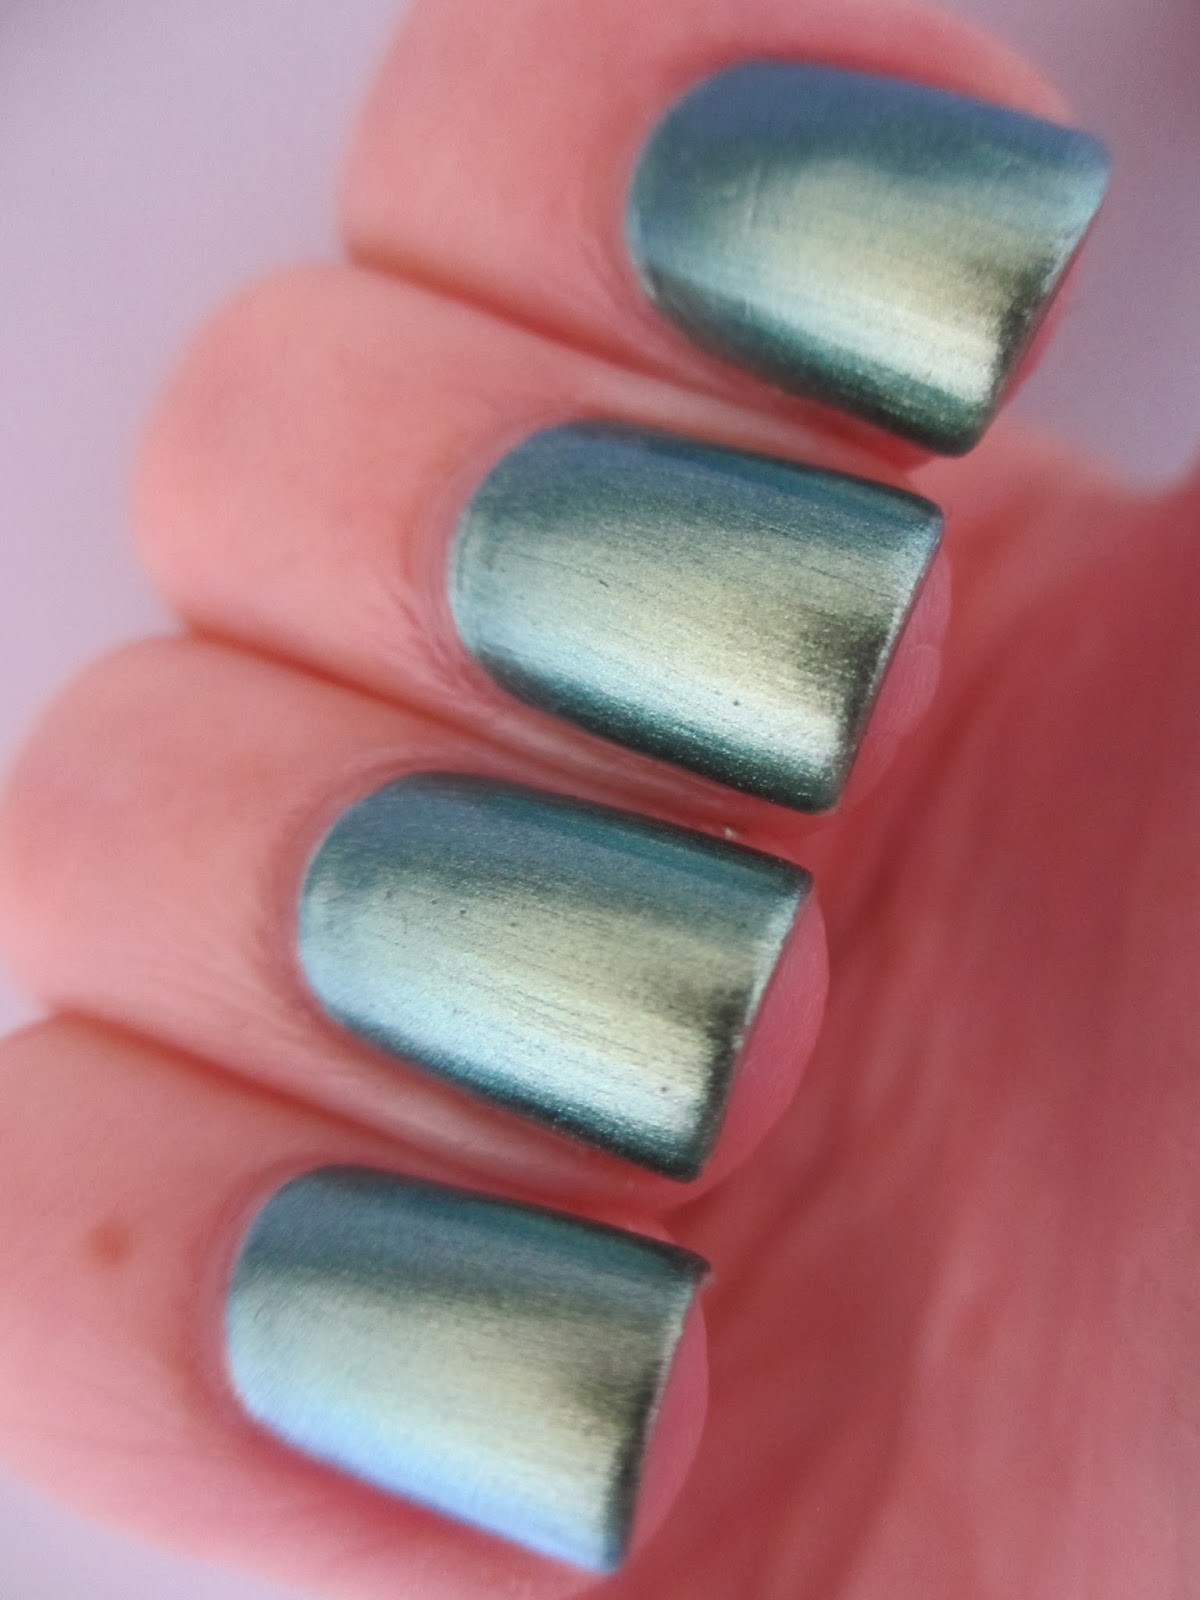 Claire's-Dollar-blue-green-duochrome-swatch-nail-polish